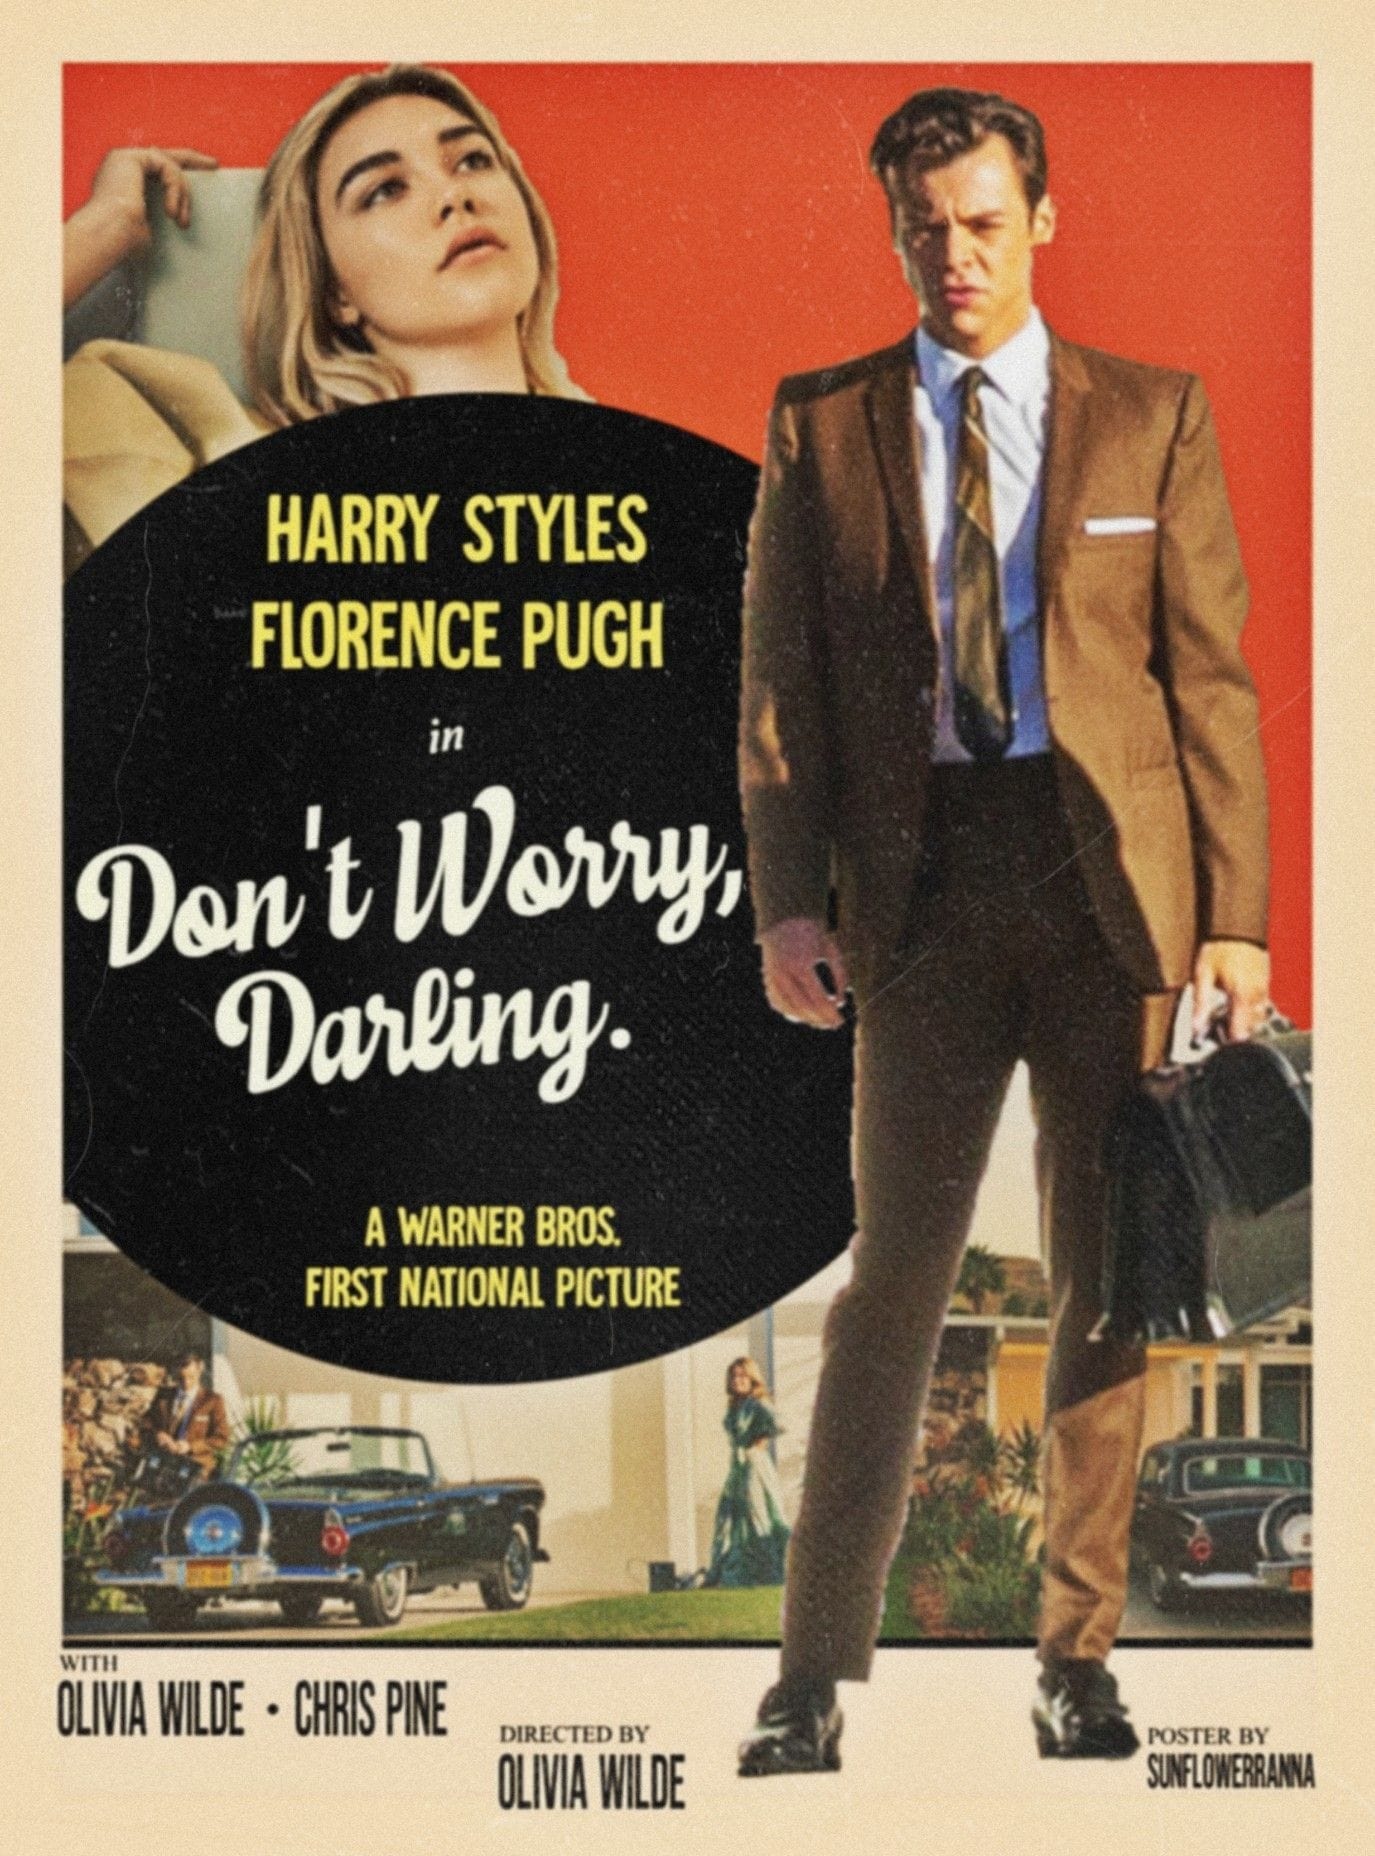 Poster for the movie "Don't Worry, Darling"